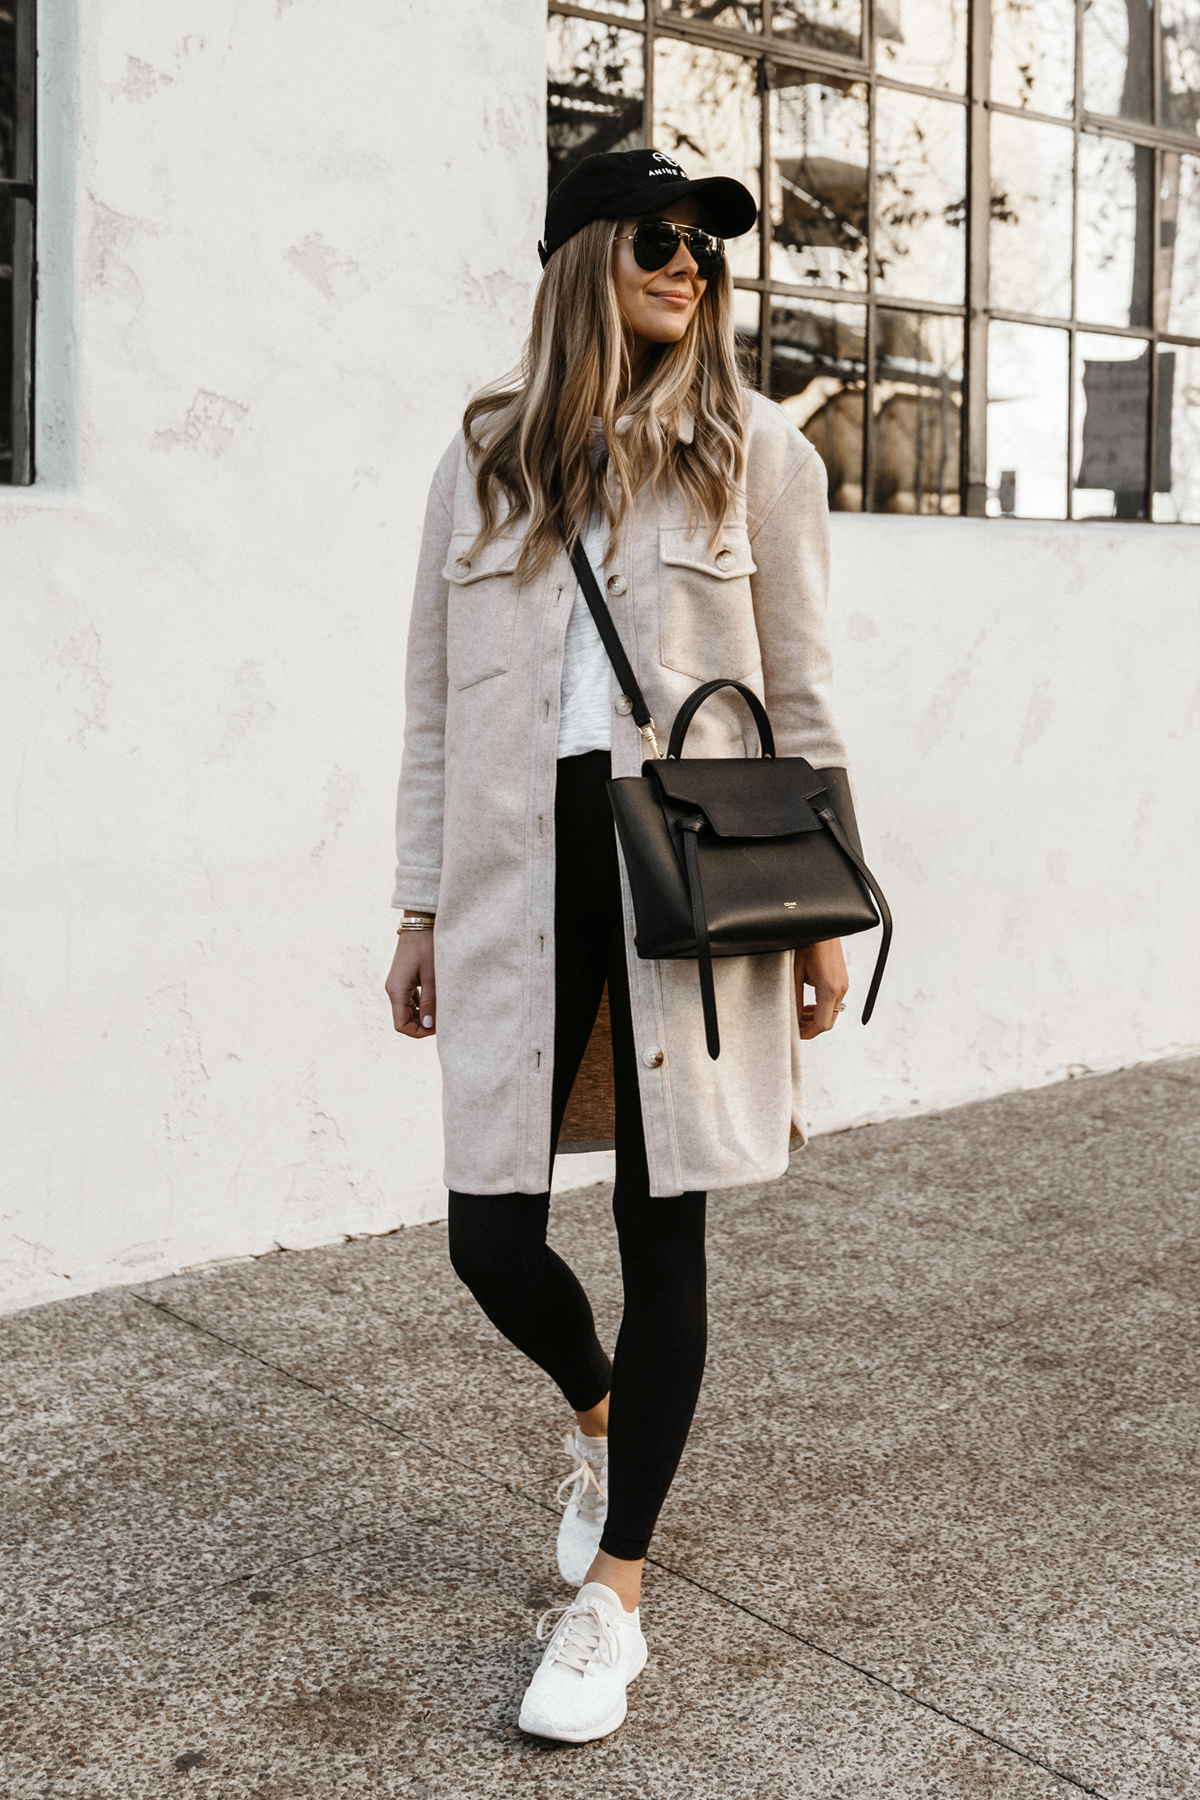 Casual leather leggings outfit on Stylevore-thanhphatduhoc.com.vn